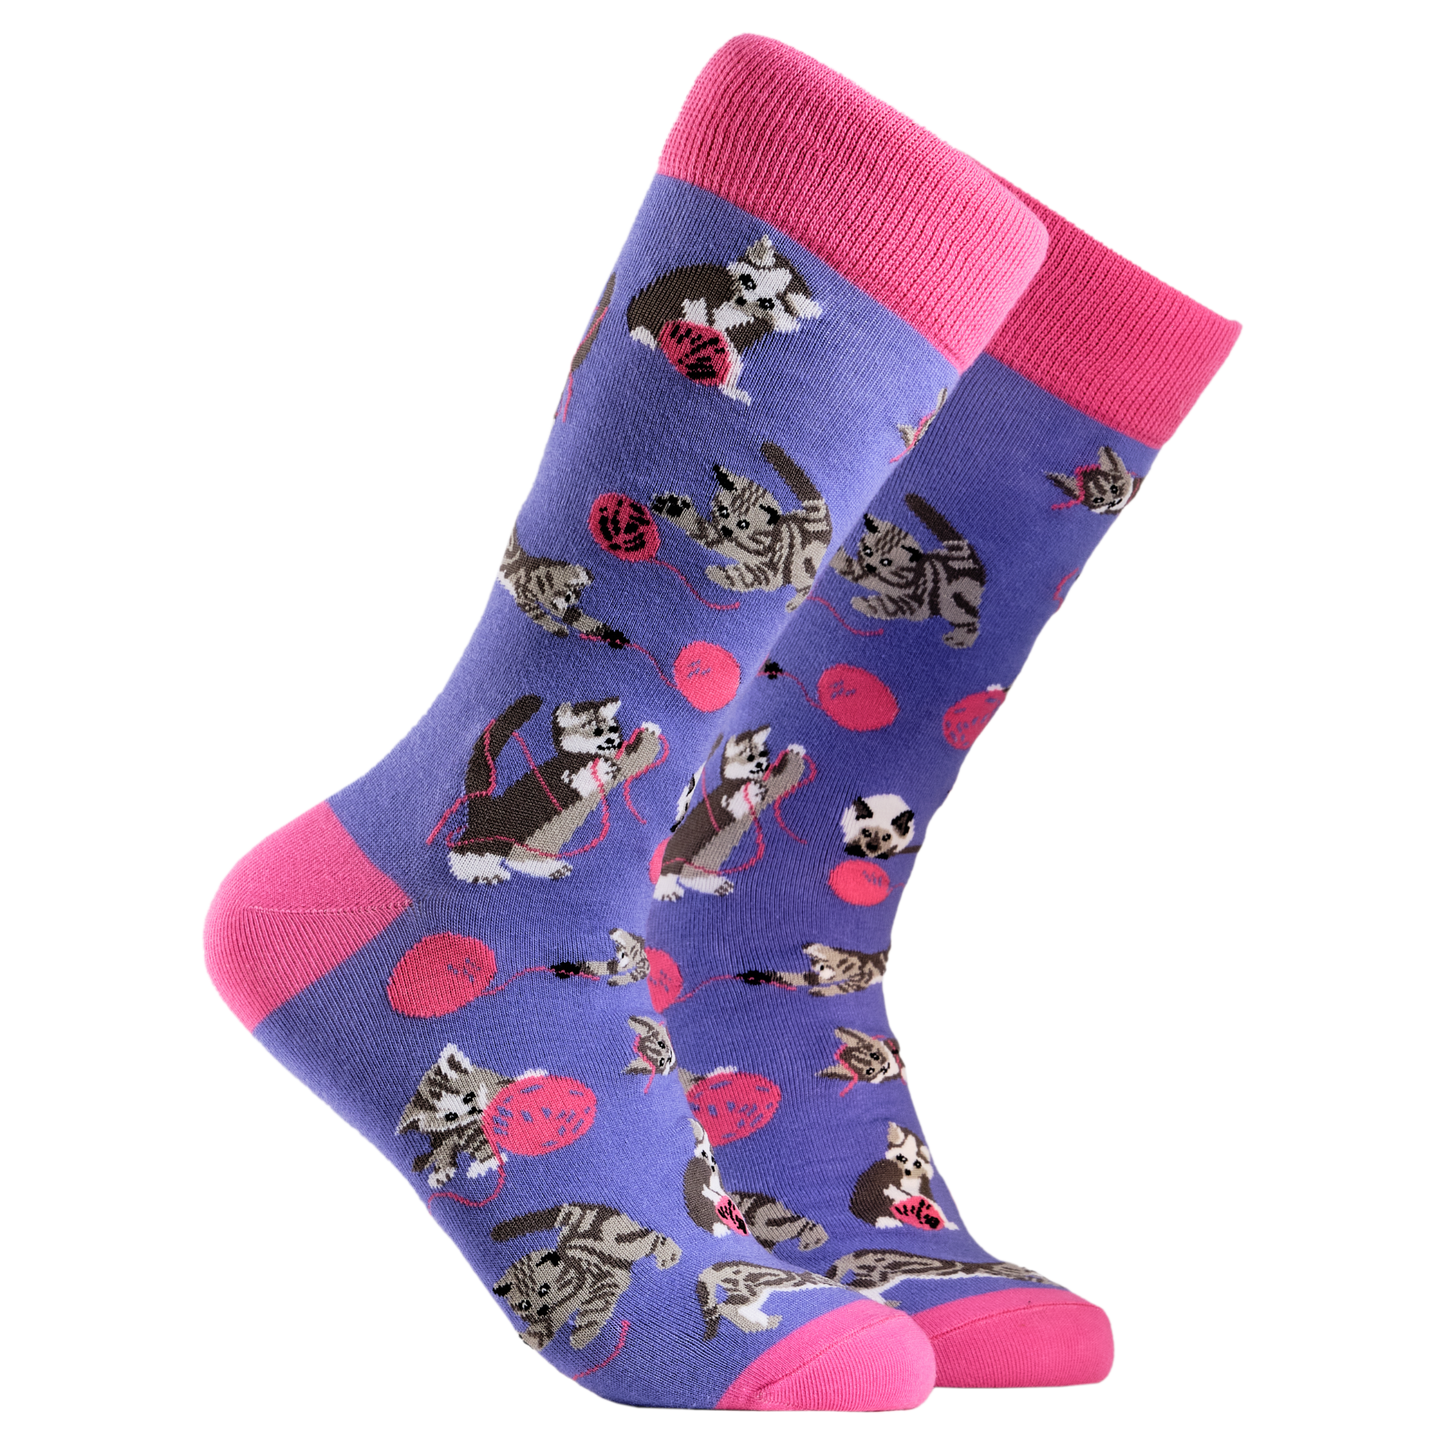 Cats and Wool Socks. A pair of socks depicting cats playing with wool. Purple legs, pink cuff, heel and toe.